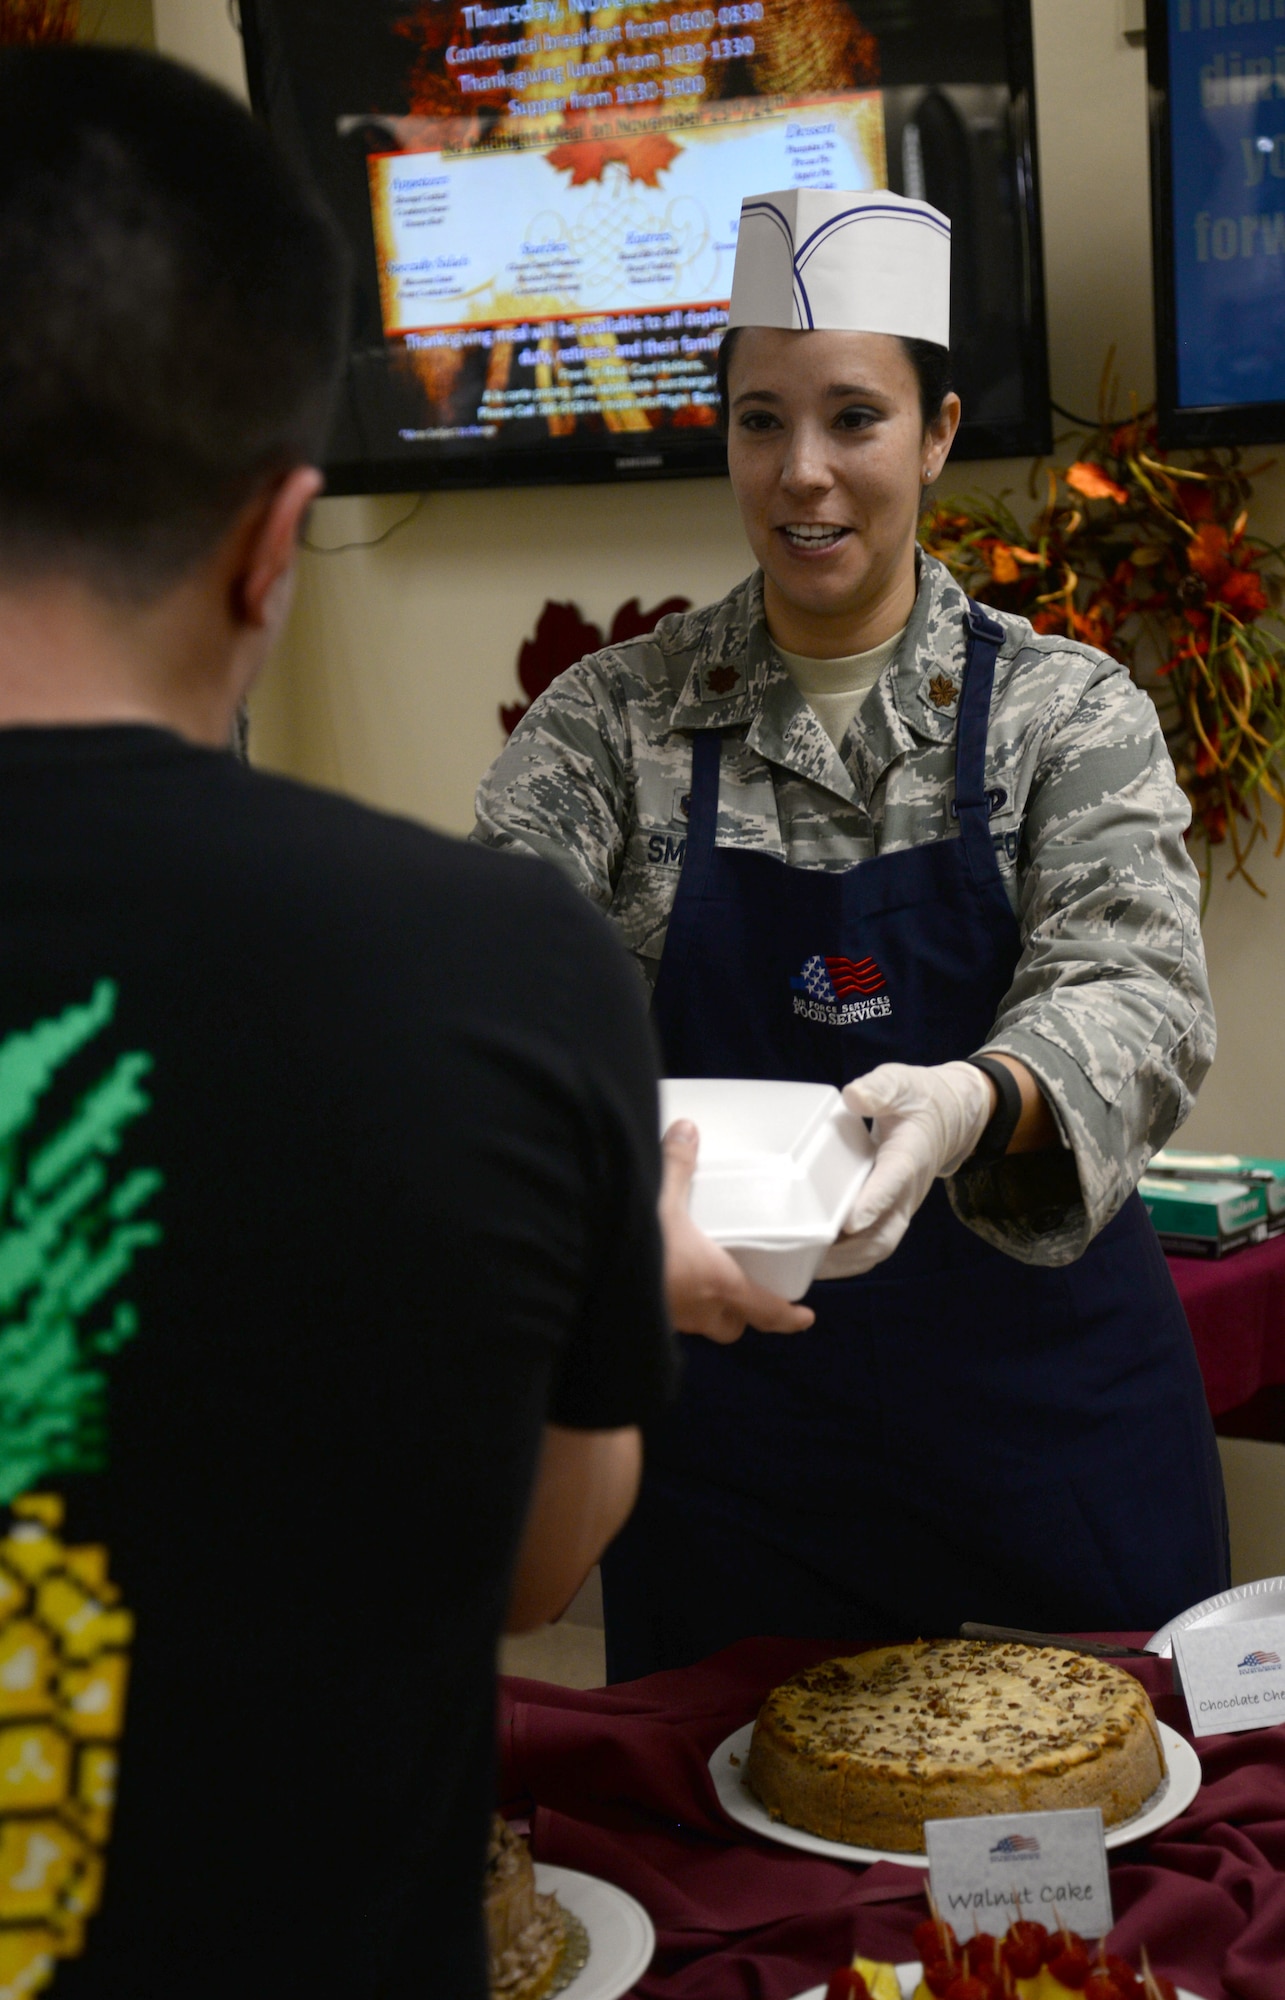 Maj. Katrina Smith, 36th Logistics Readiness Squadron commander, serves Thanksgiving meals at the Magellan Inn dining facility Nov. 24, 2016, at Andersen Air Force Base, Guam. The annual Thanksgiving meal brings service members together to eat and celebrate the holiday away from home with friends and family. (U.S. Air Force photo by Airman 1st Class Gerald R. Willis)